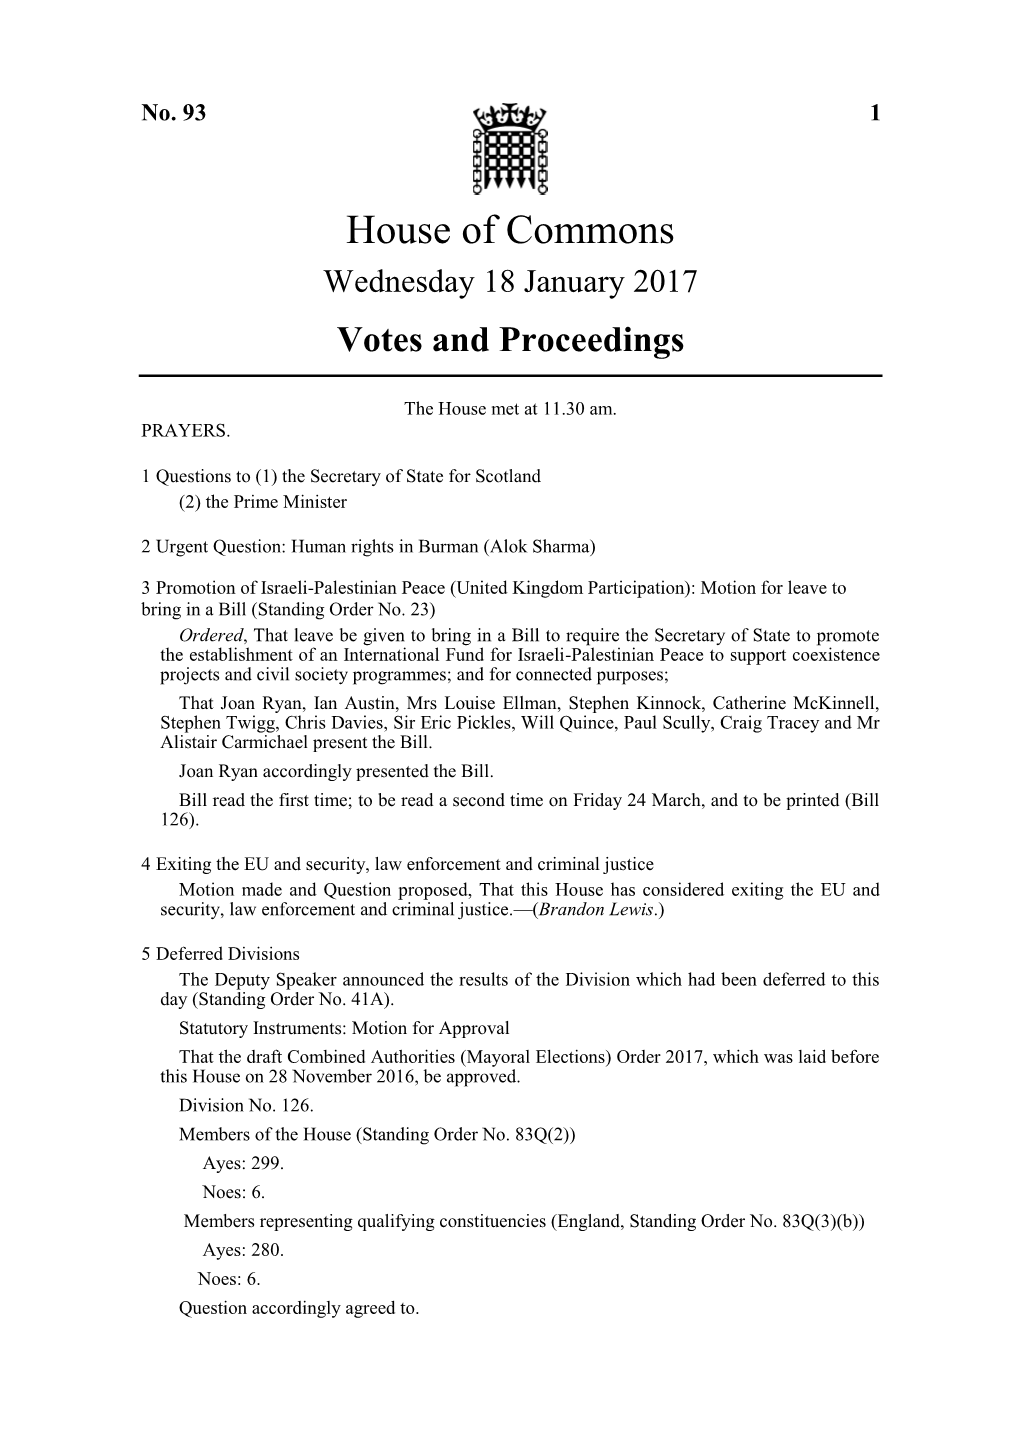 House of Commons Wednesday 18 January 2017 Votes and Proceedings